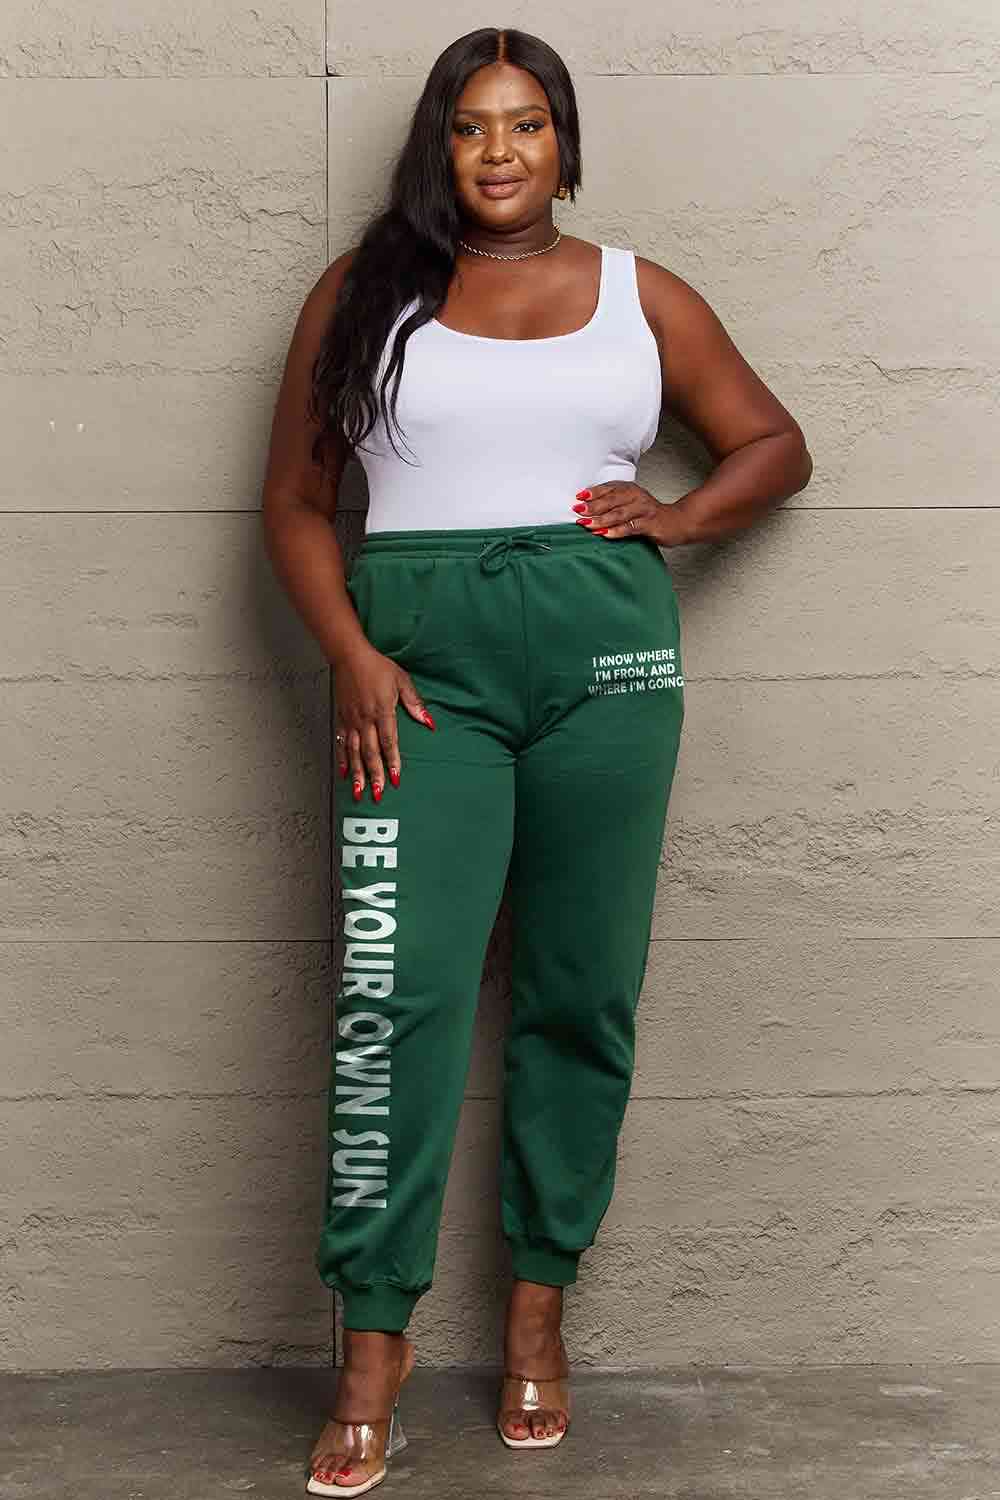 Simply Love BE YOUR OWN SUN Graphic Sweatpants